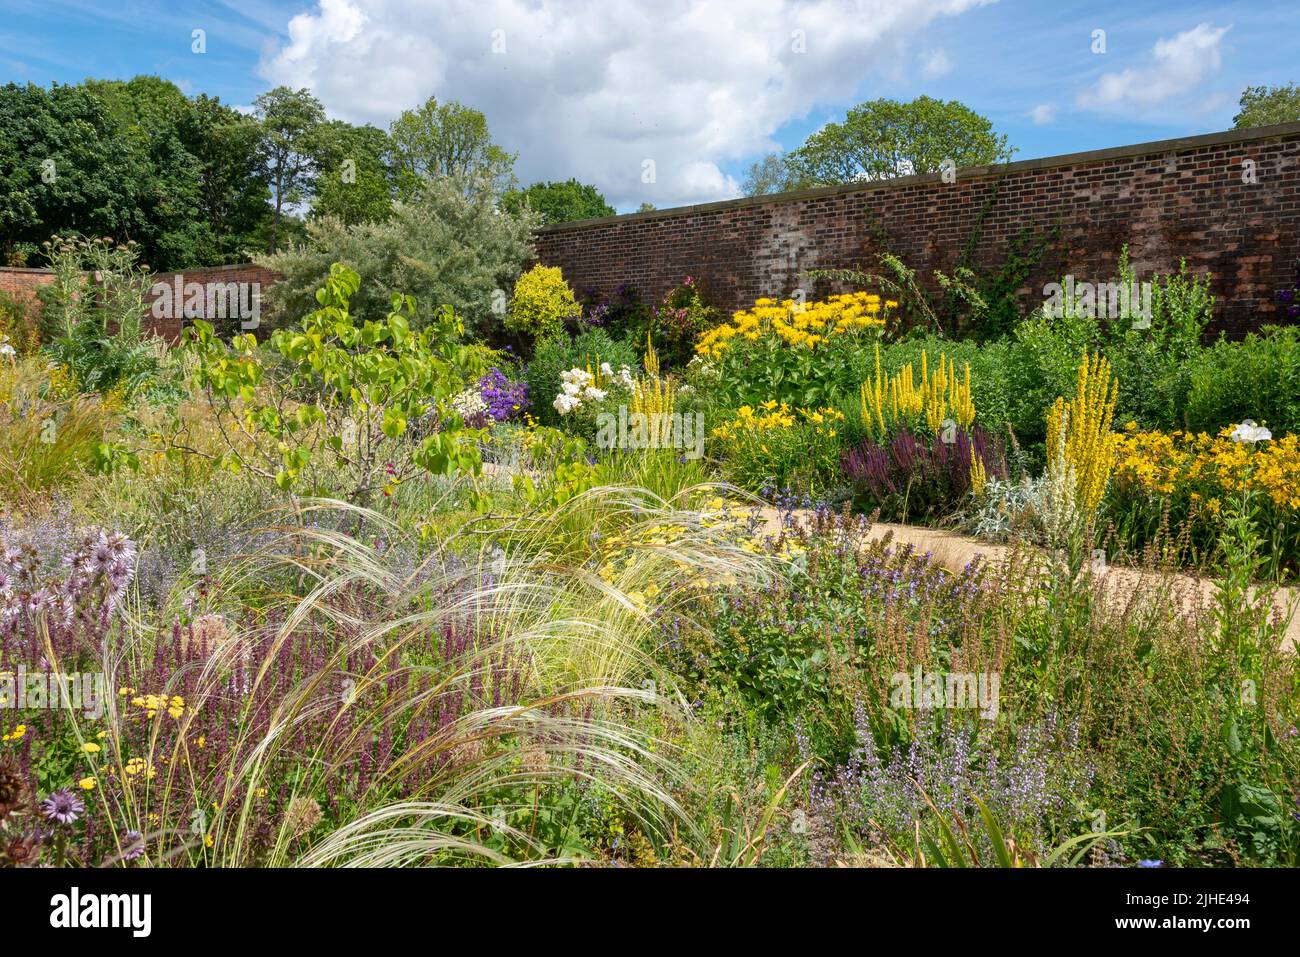 RHS Bridgewater garden, near Manchester, England in mid summer. The paradise garden with planting of colourful perennials, shrubs and ornamental grass. Stock Photo